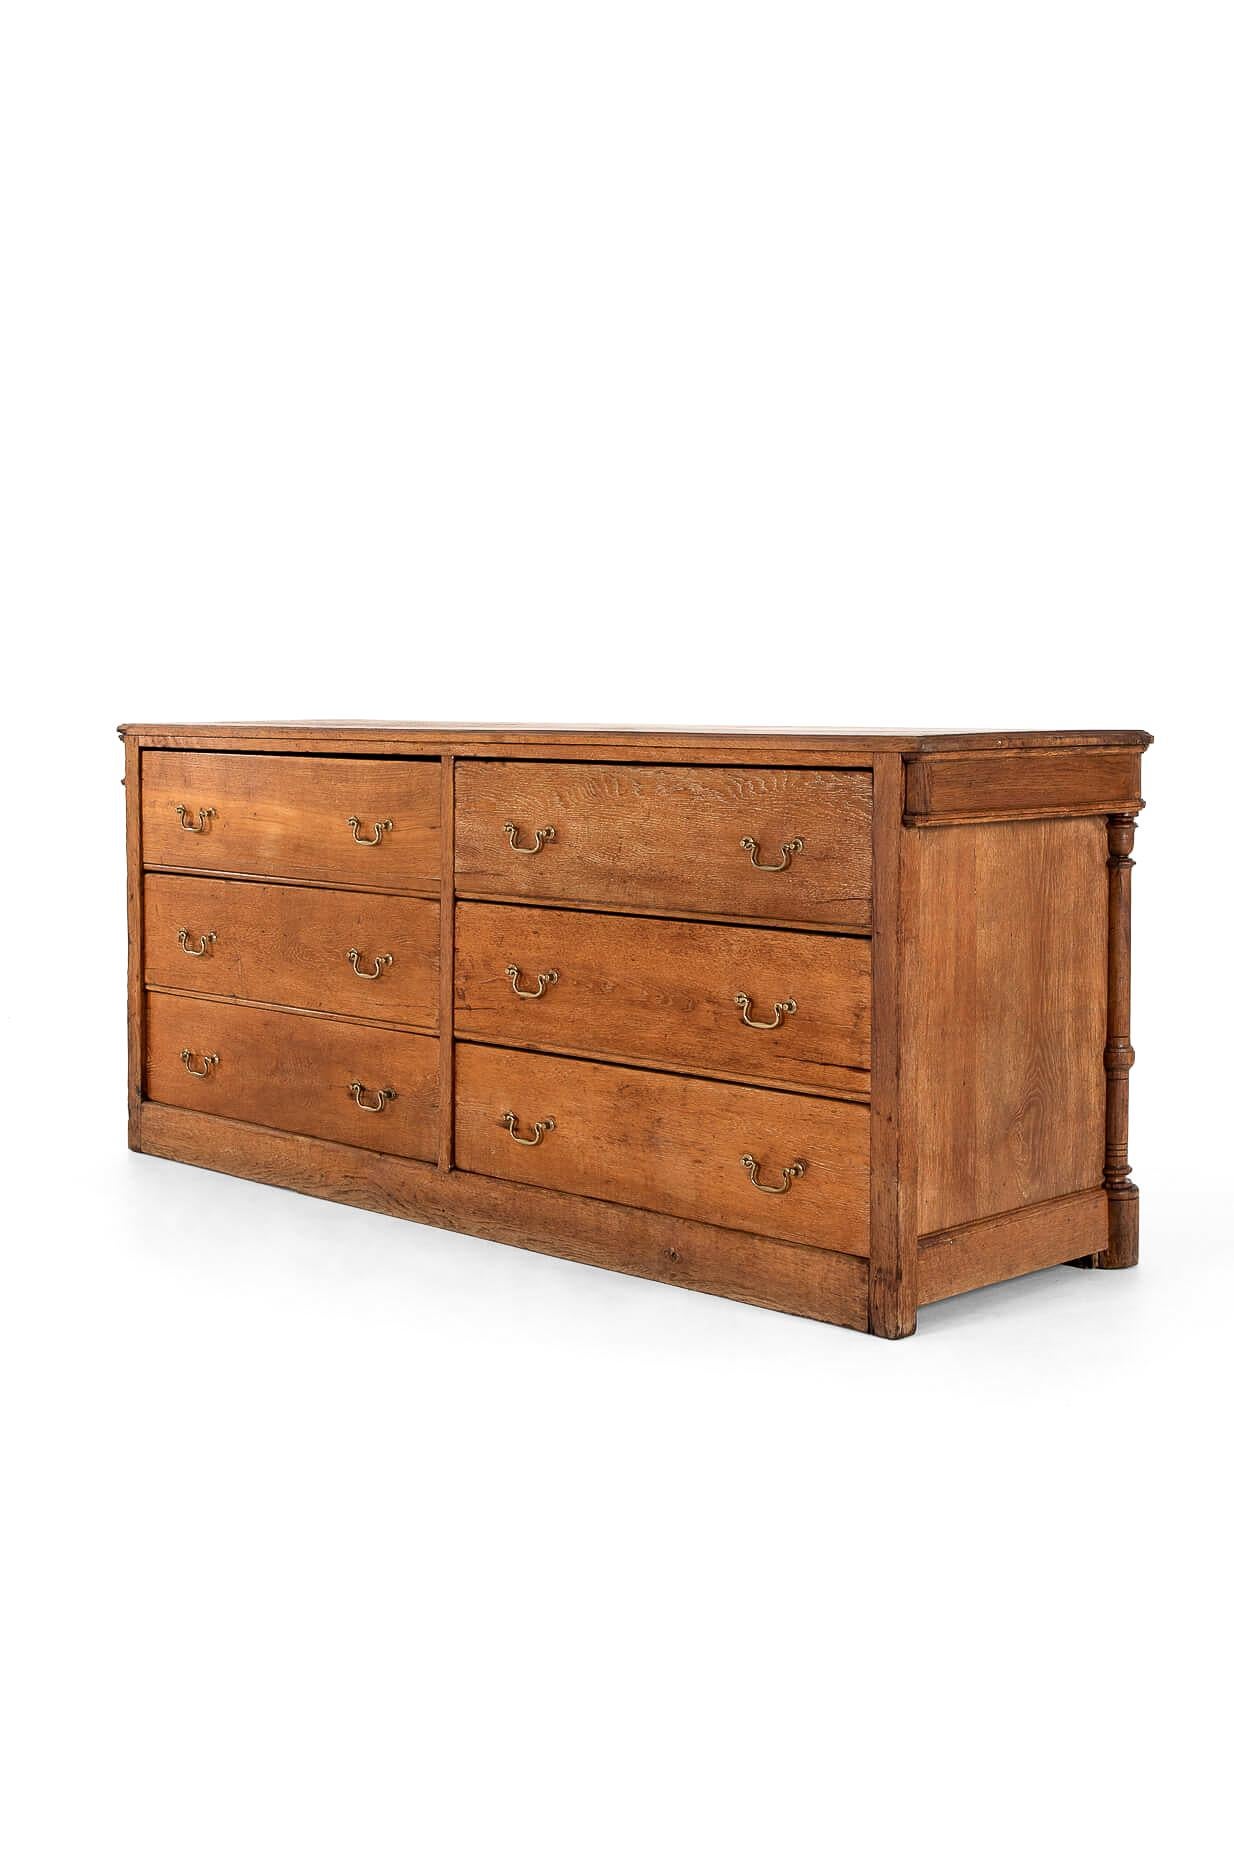 A wonderfully presented bank of haberdashery drawers in limed oak with a generous thick plank top.

Six unusually large smooth-running frieze drawers with original brass loop handles and shapely carvings on both ends, raised on a plinth base.

We